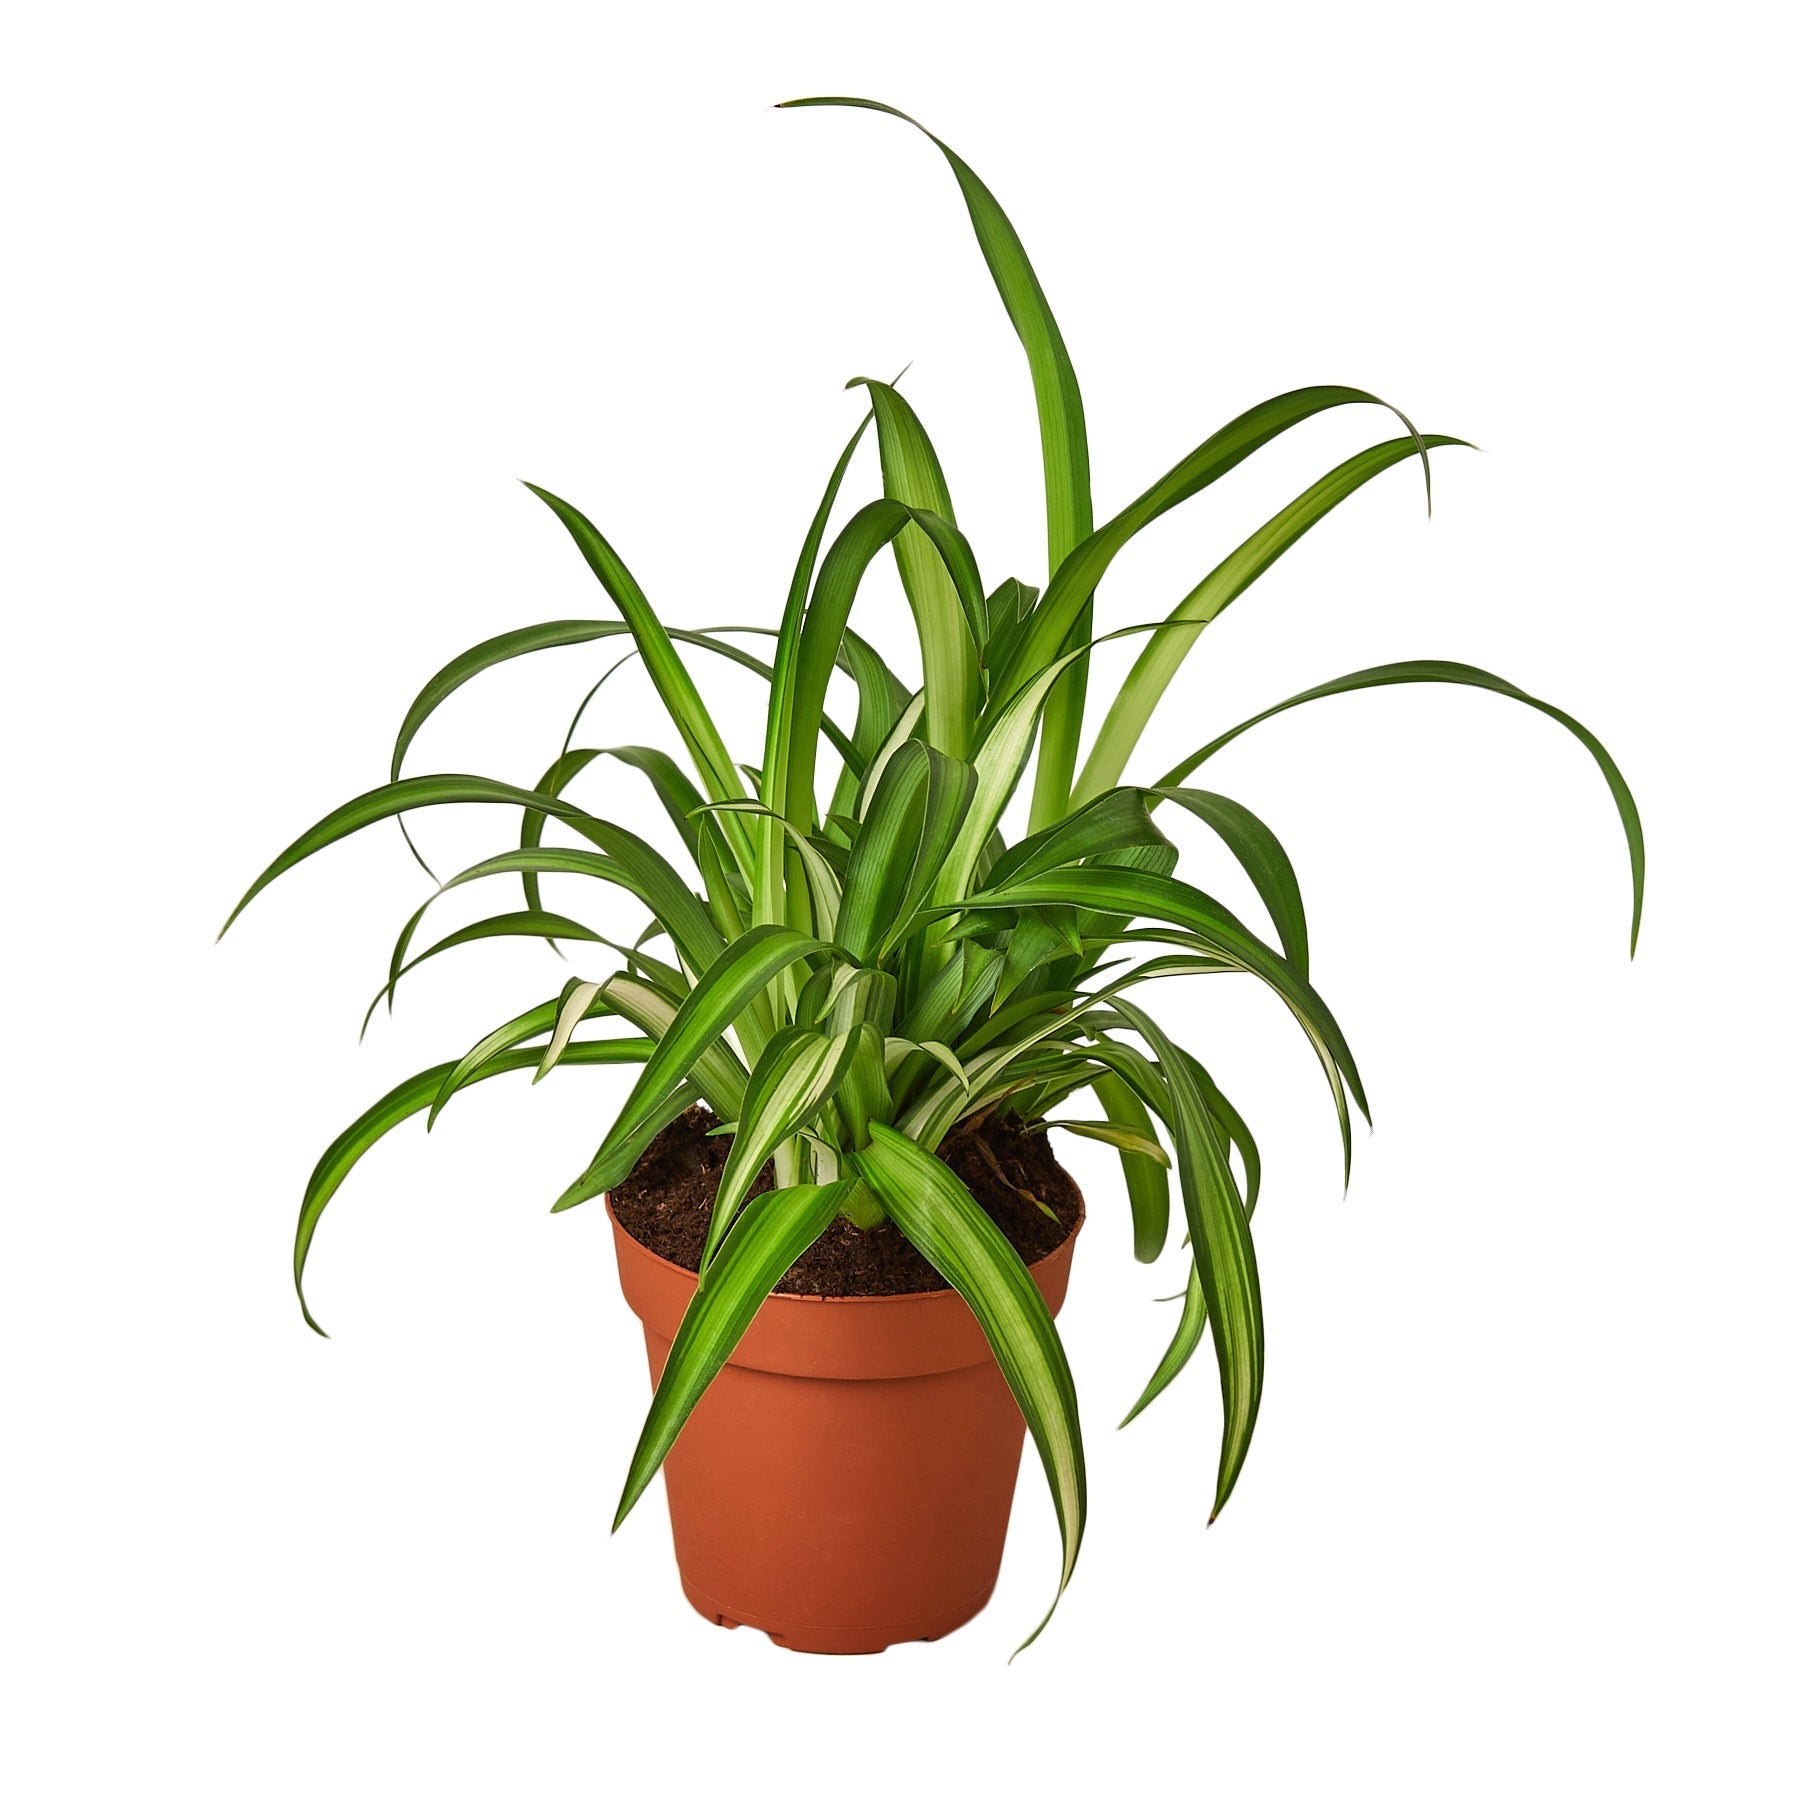 A plant in a pot on a white background available at the best plant nursery near me.